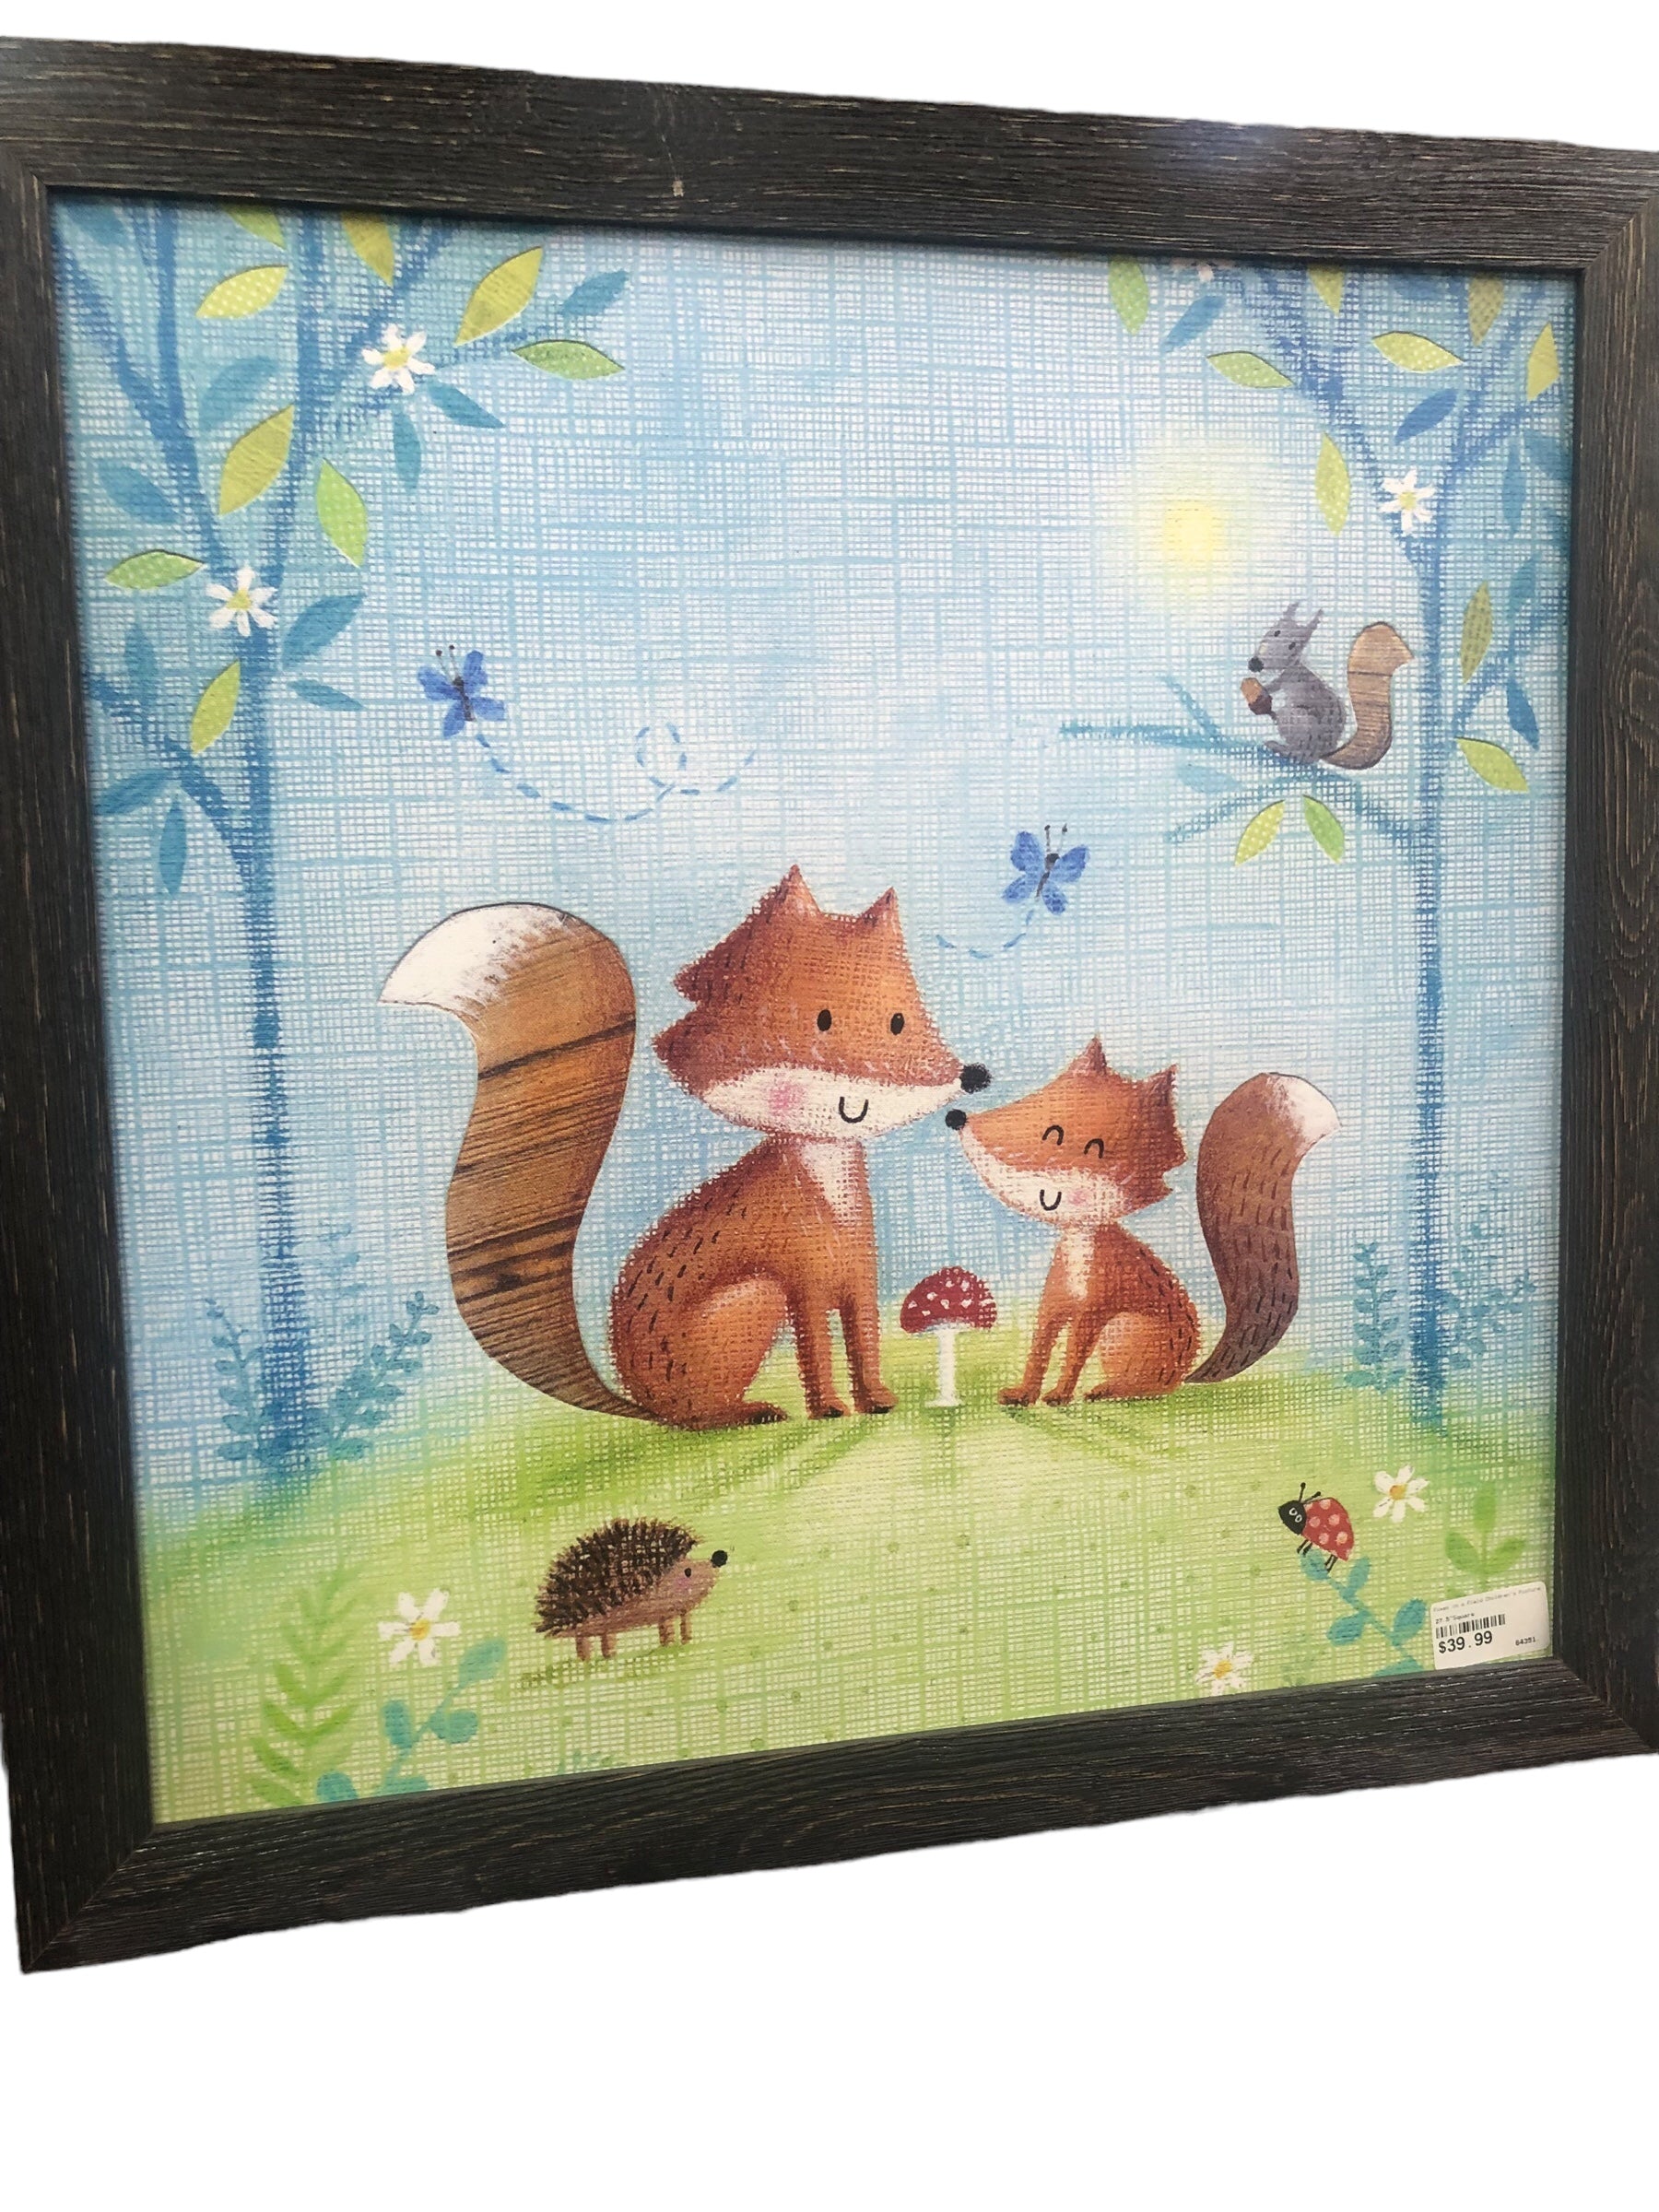 Foxes in a Field Children's Picture